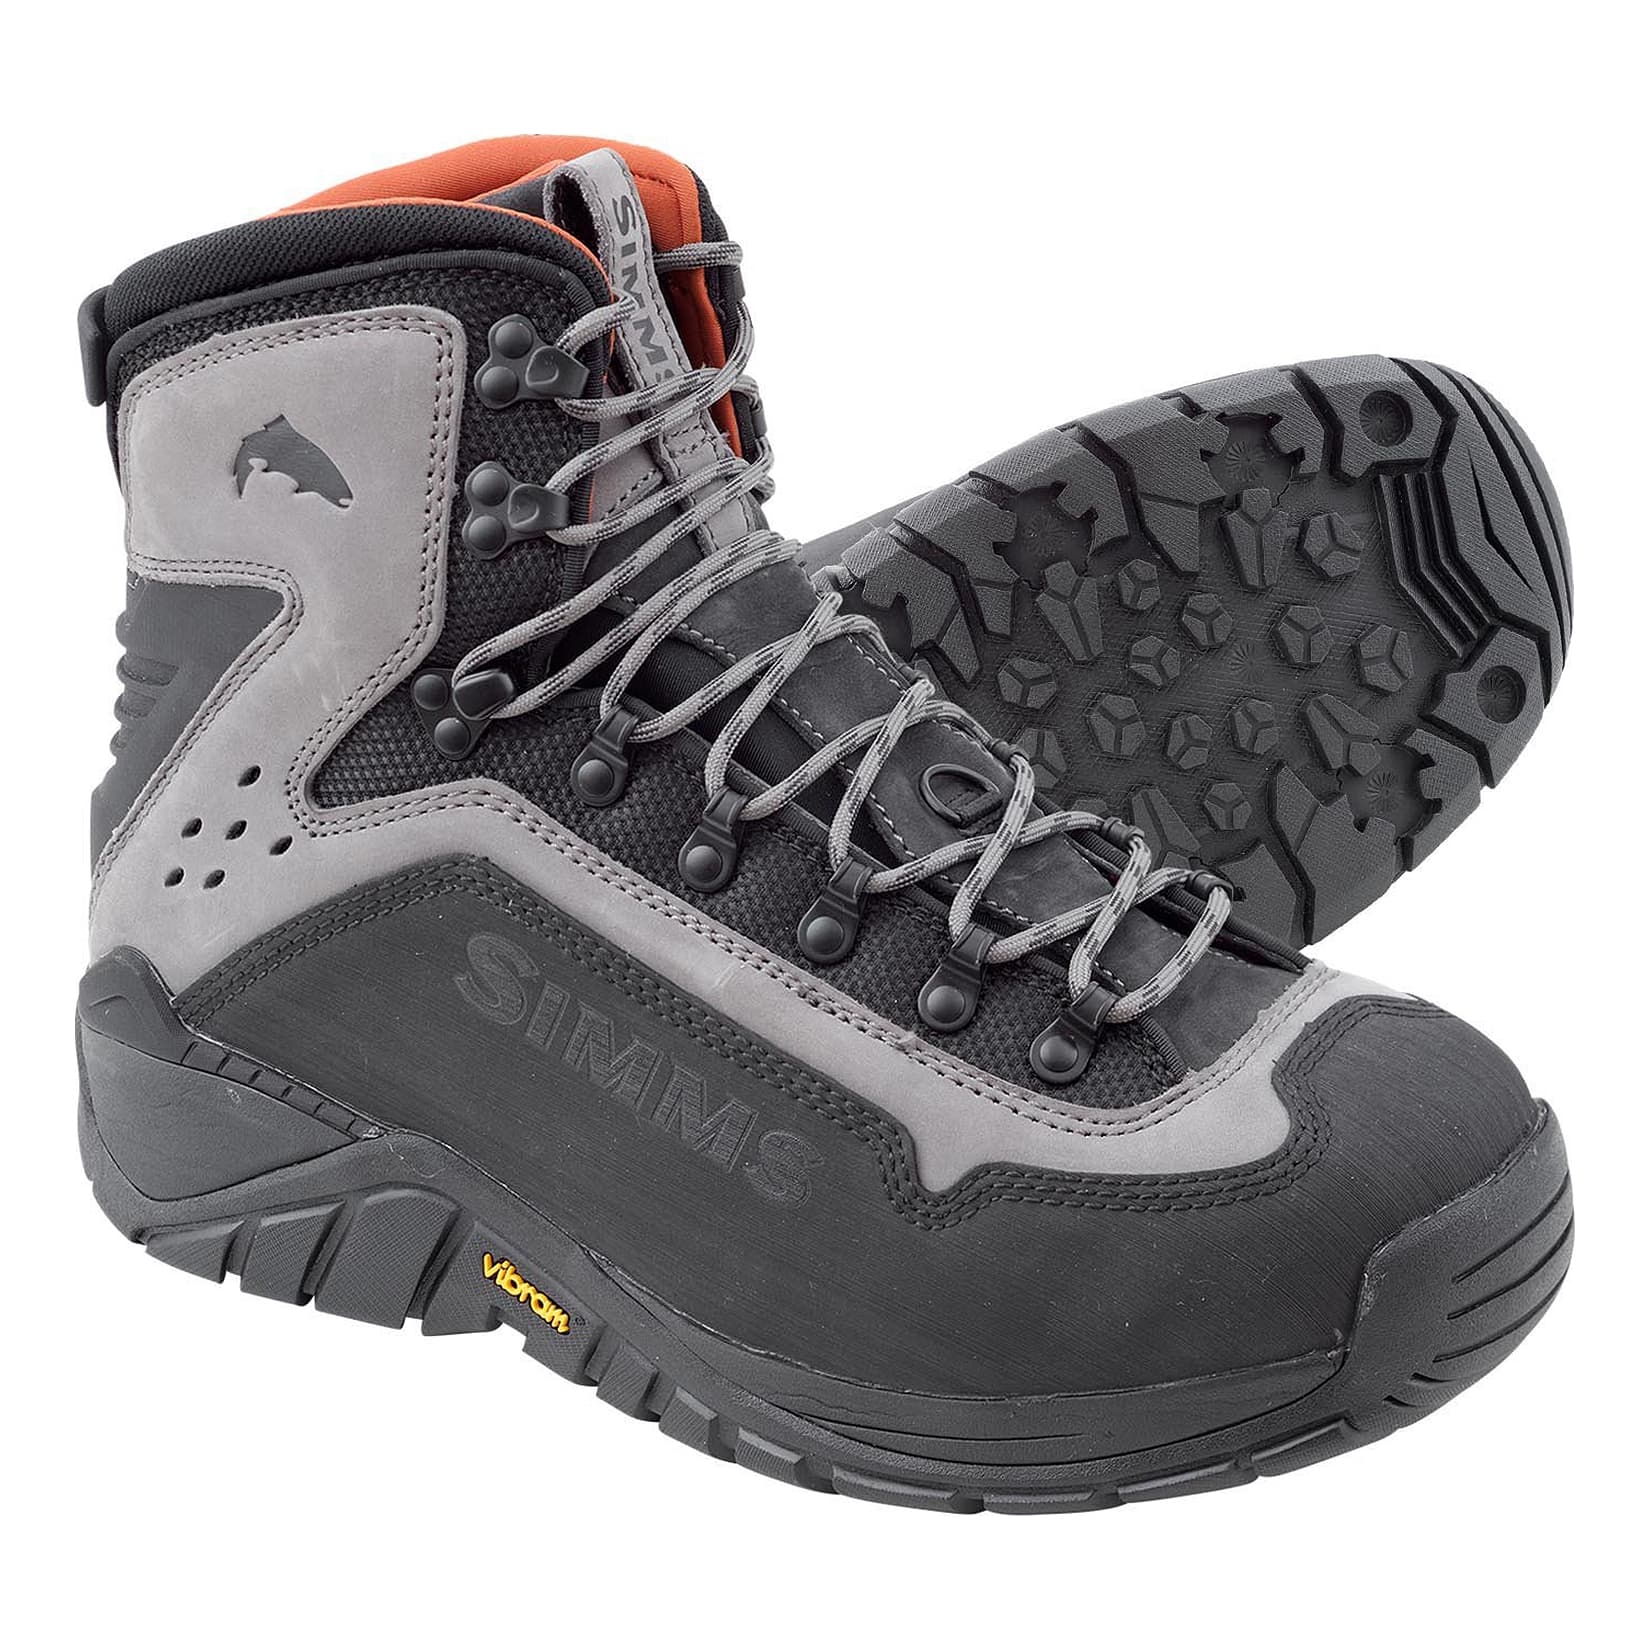 Simms® Men's Tributary Wading Boot